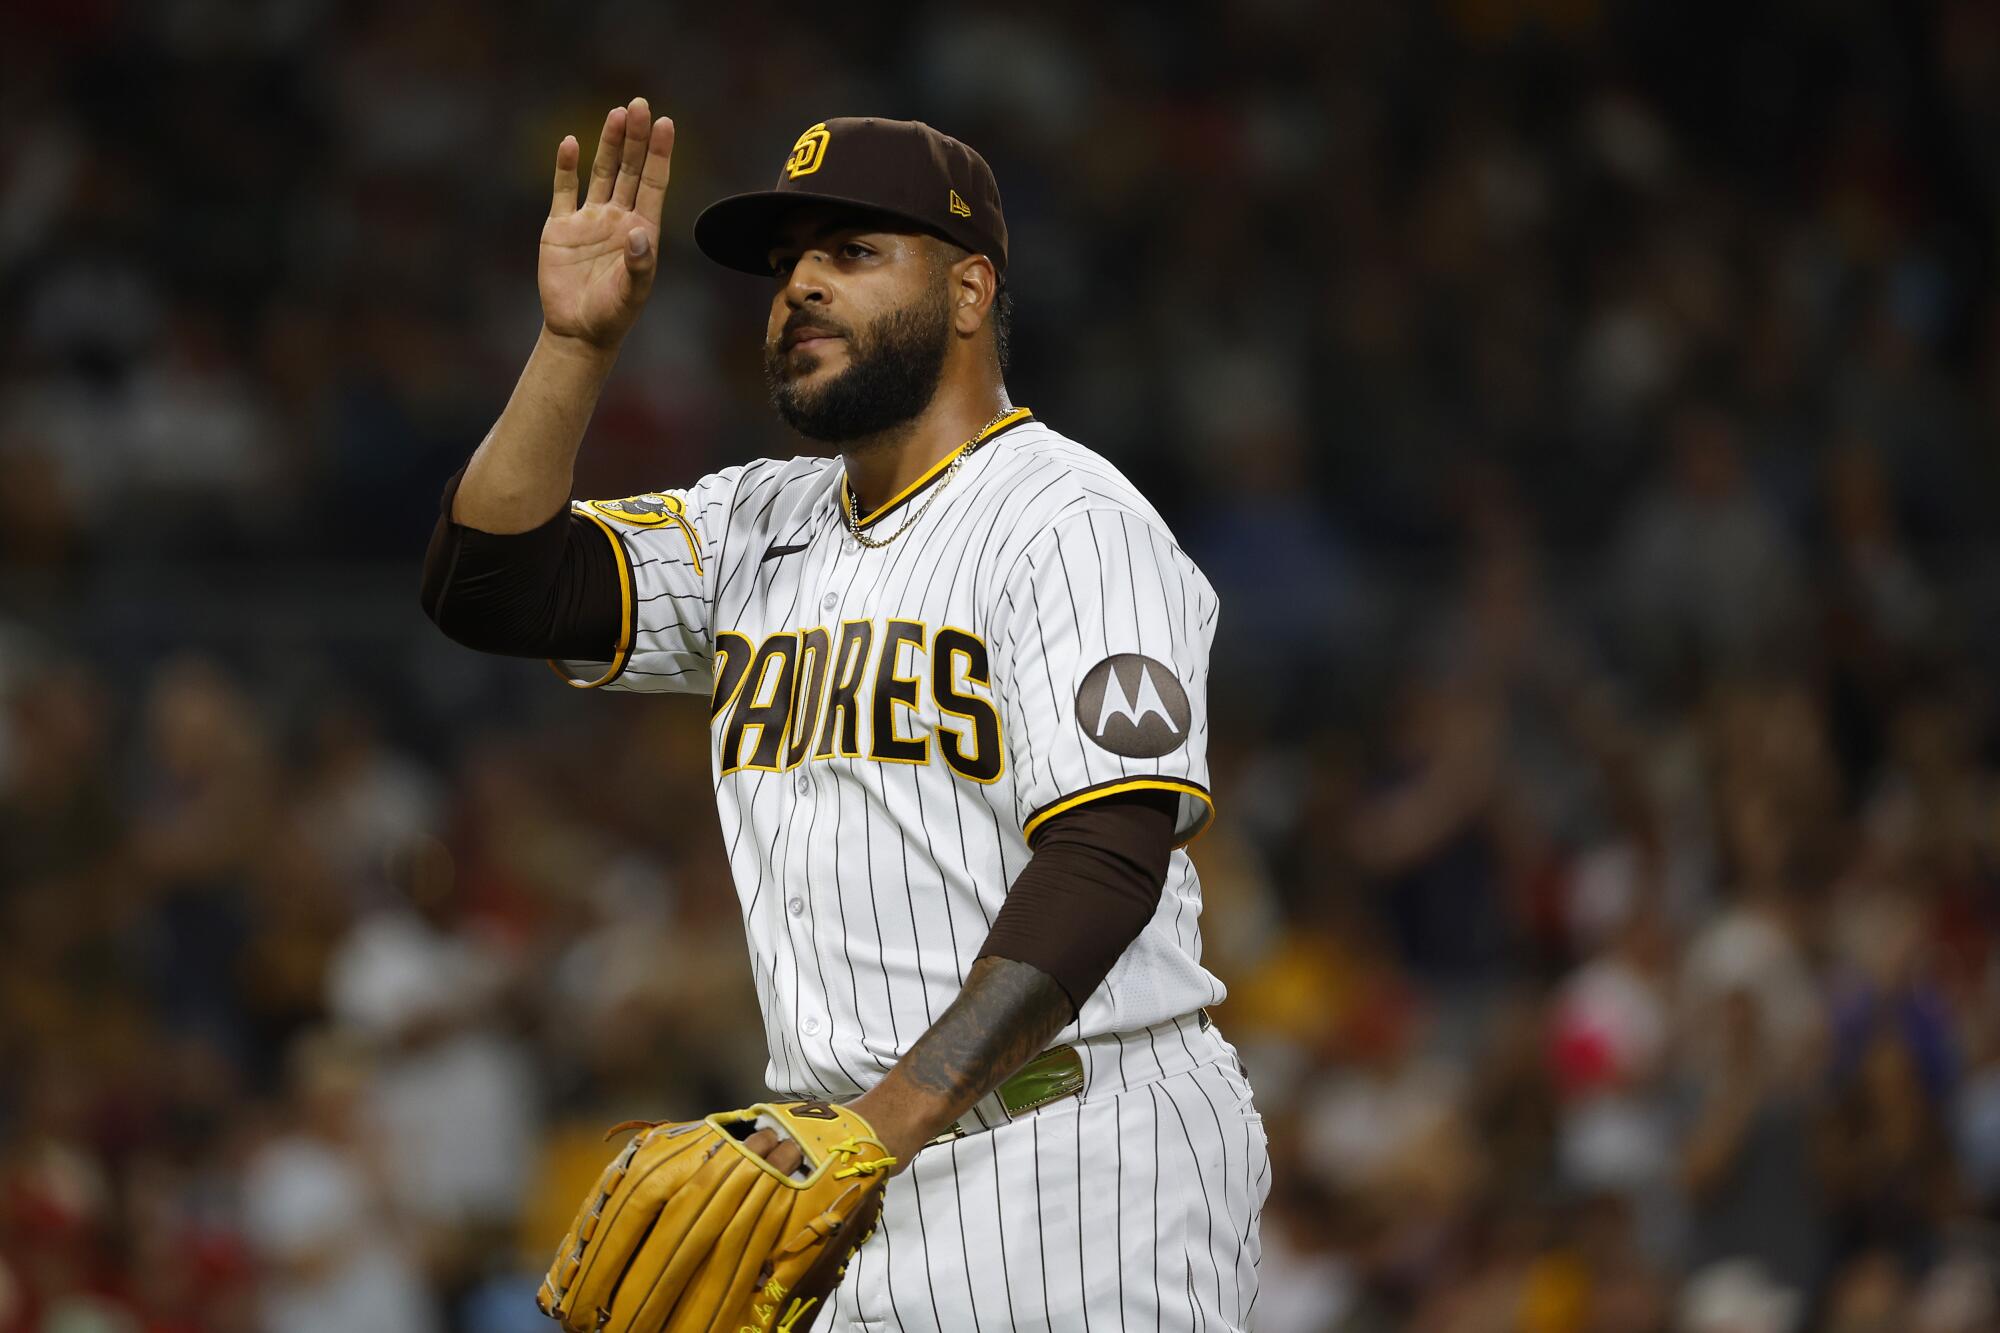 Tatis homers and rookie Avila gets his 1st win as Padres shut out